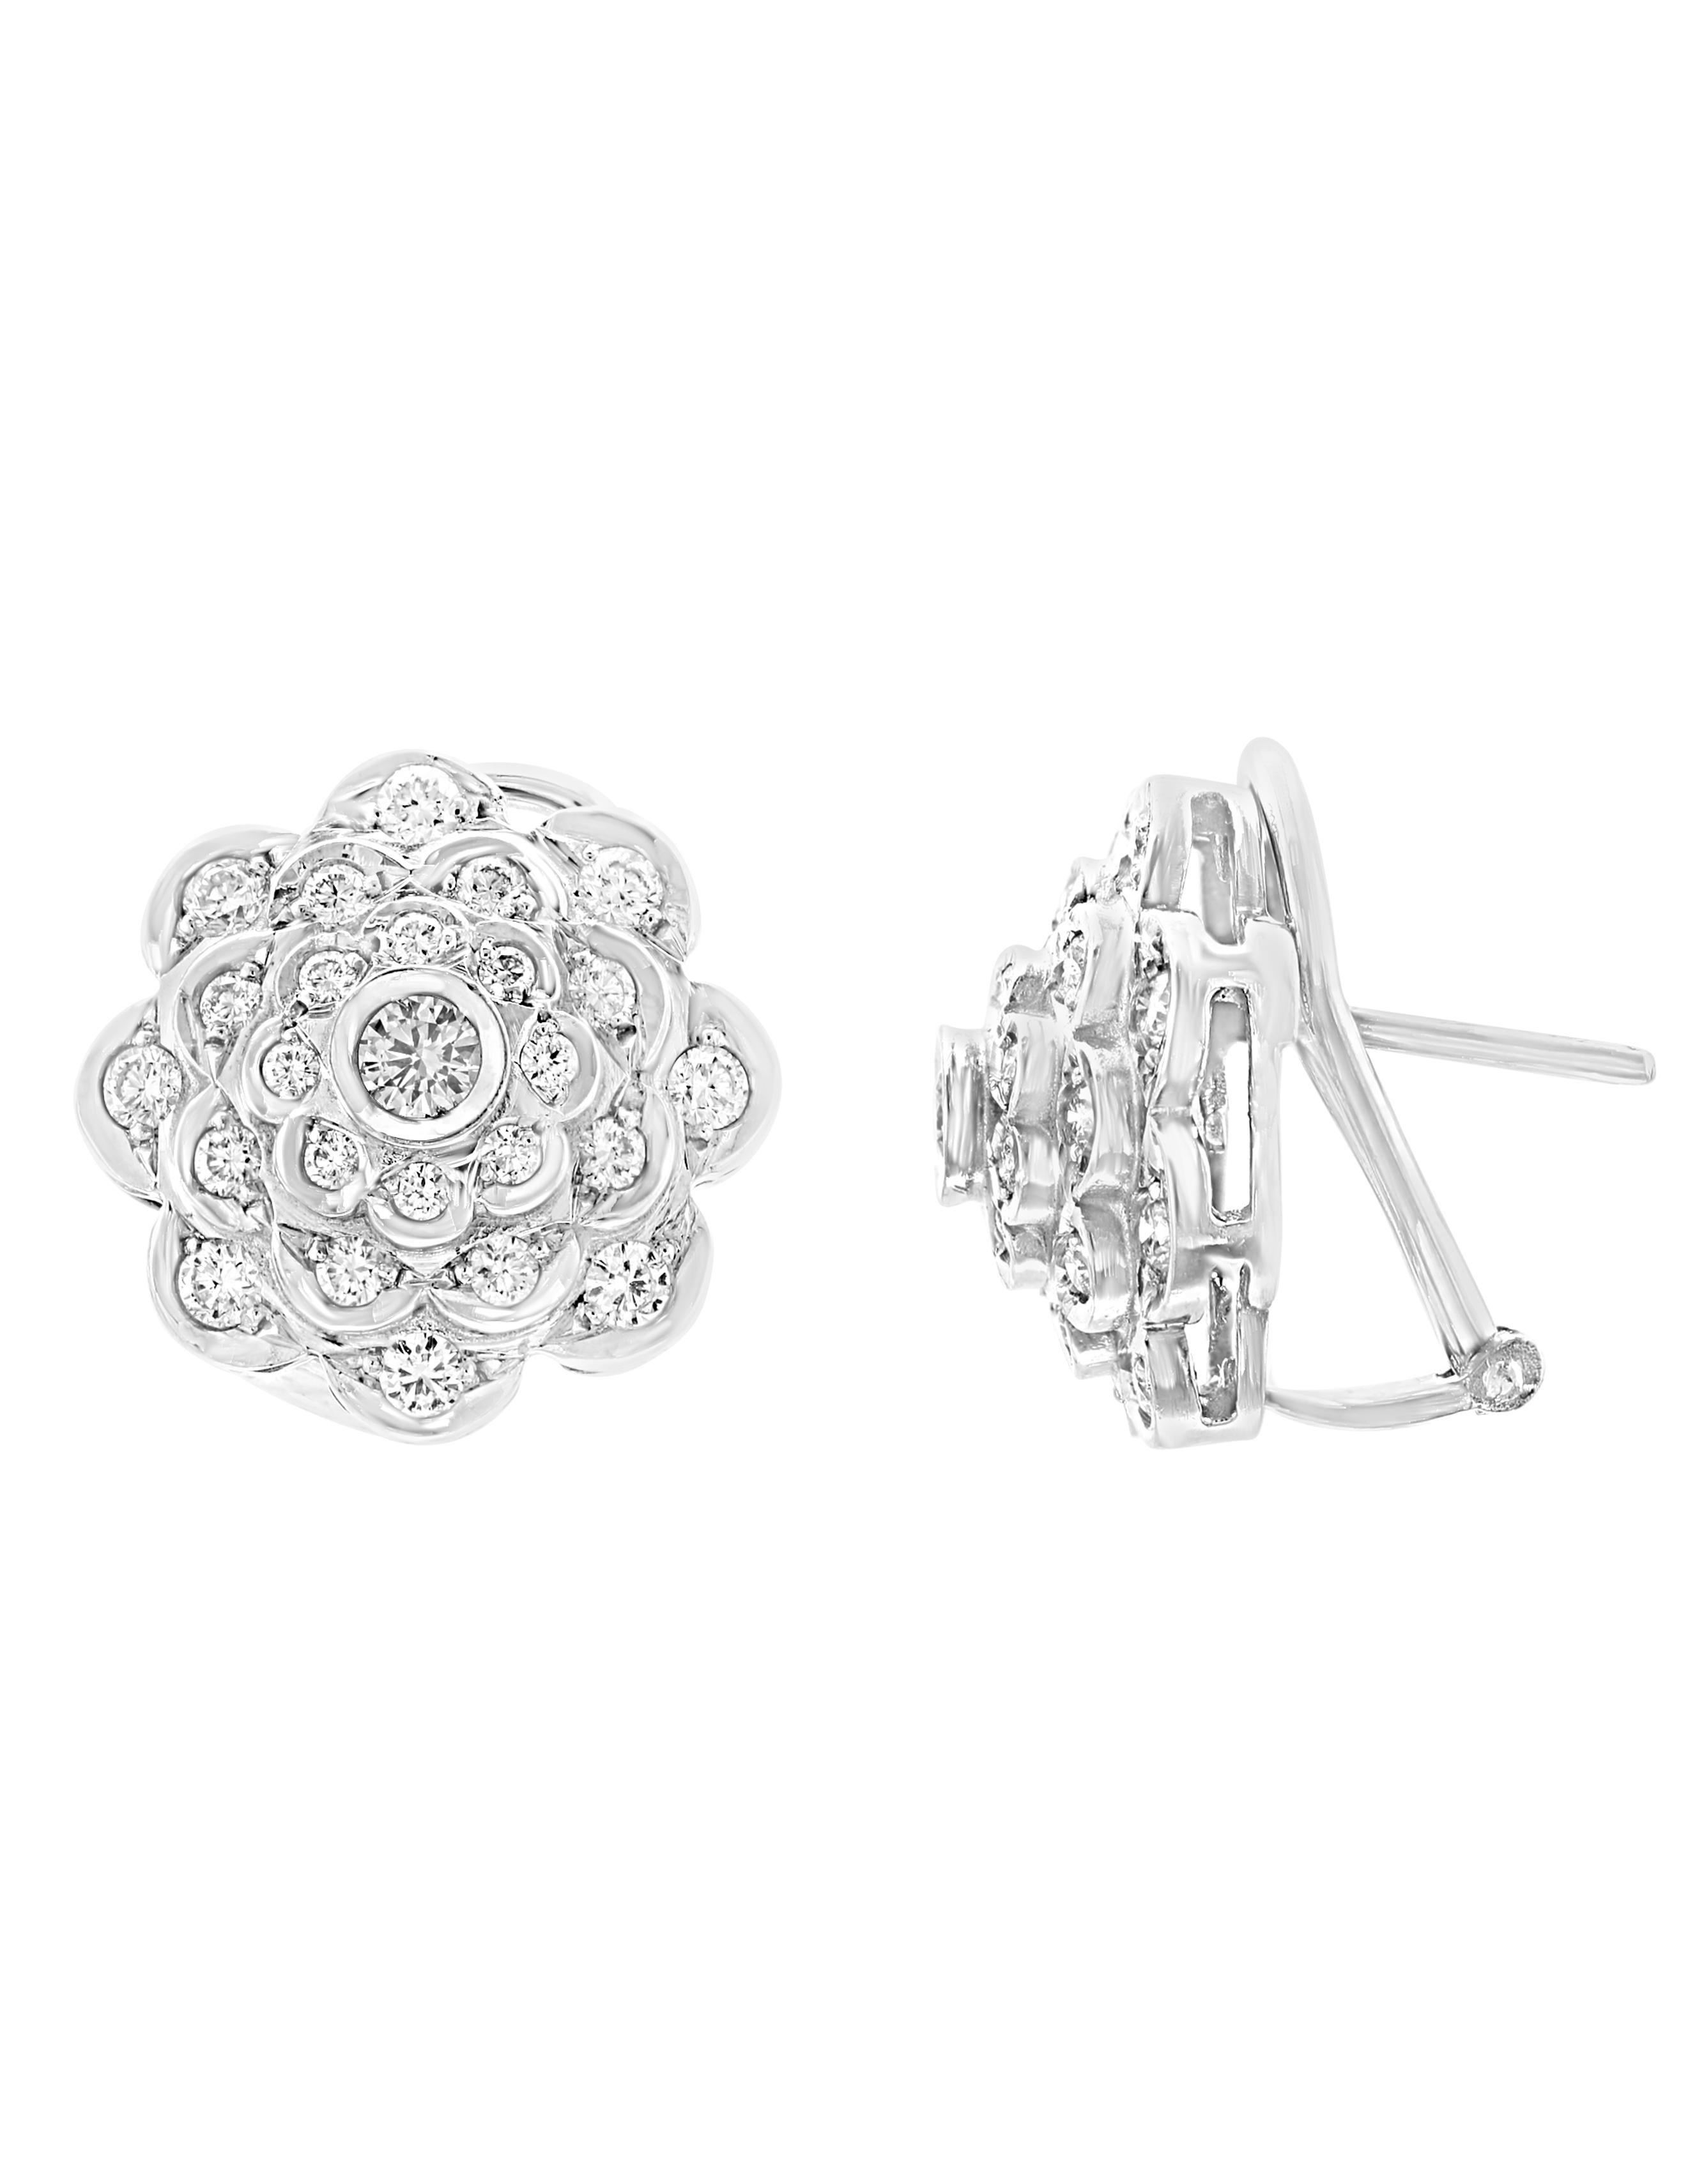 A fabulous pair of earrings with an enormous amount of look and sparkle!
2.8 carats of F-G color VS clarity diamonds set in solid 18 karat white gold  with omega backs.
Cluster earrings, featuring a center round  diamond  surrounded by  round